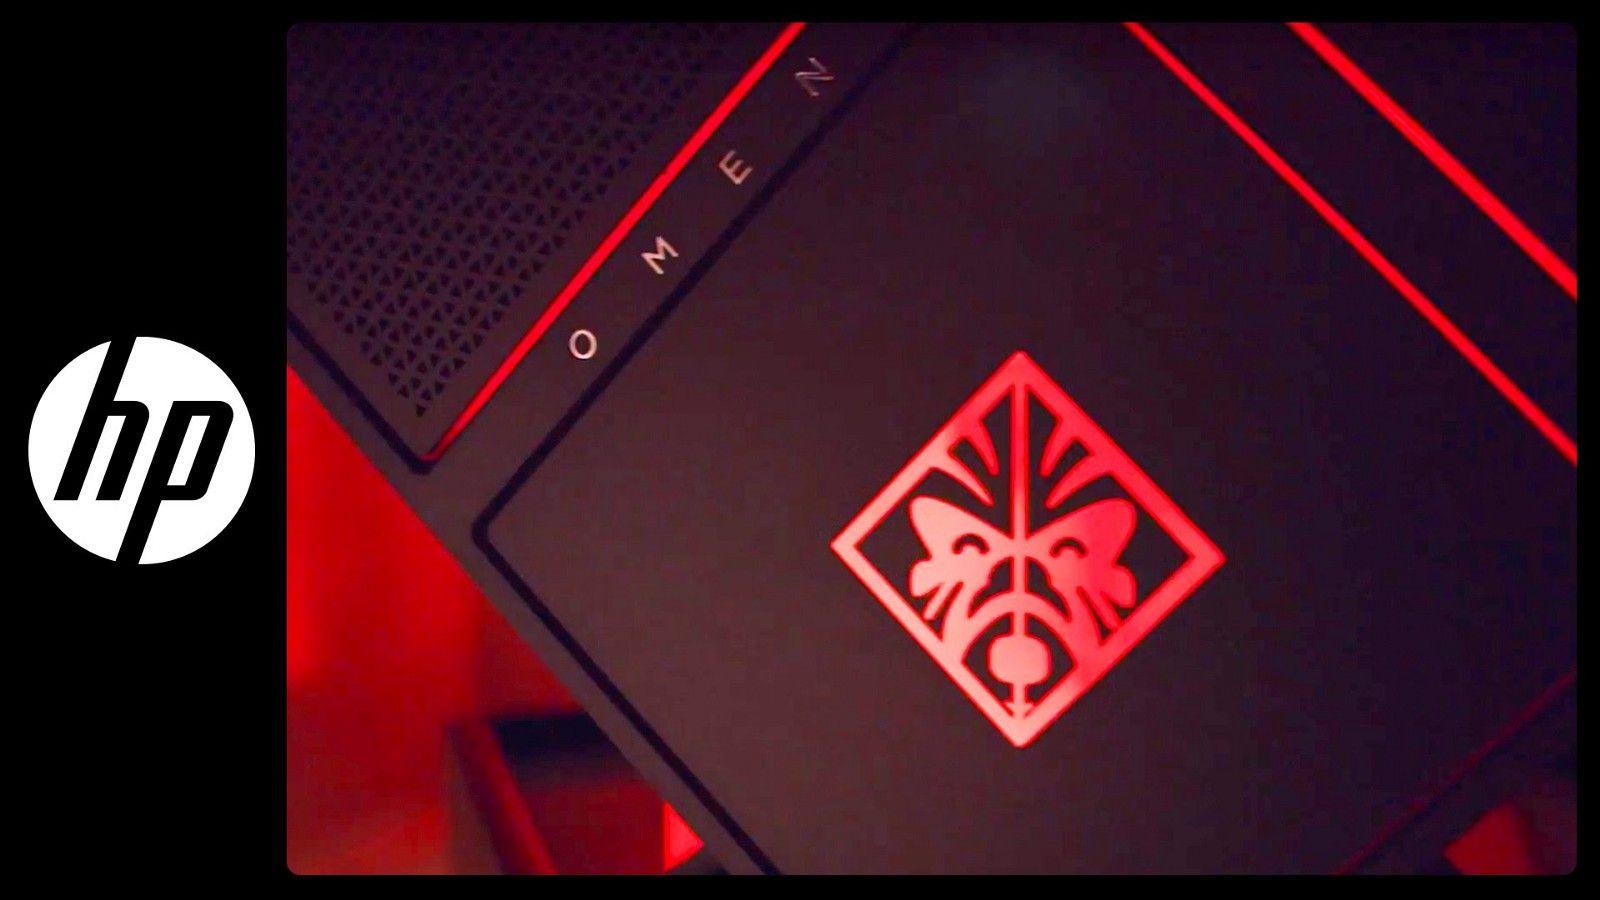 Unleashes your gaming skills with the HP OMEN X line up